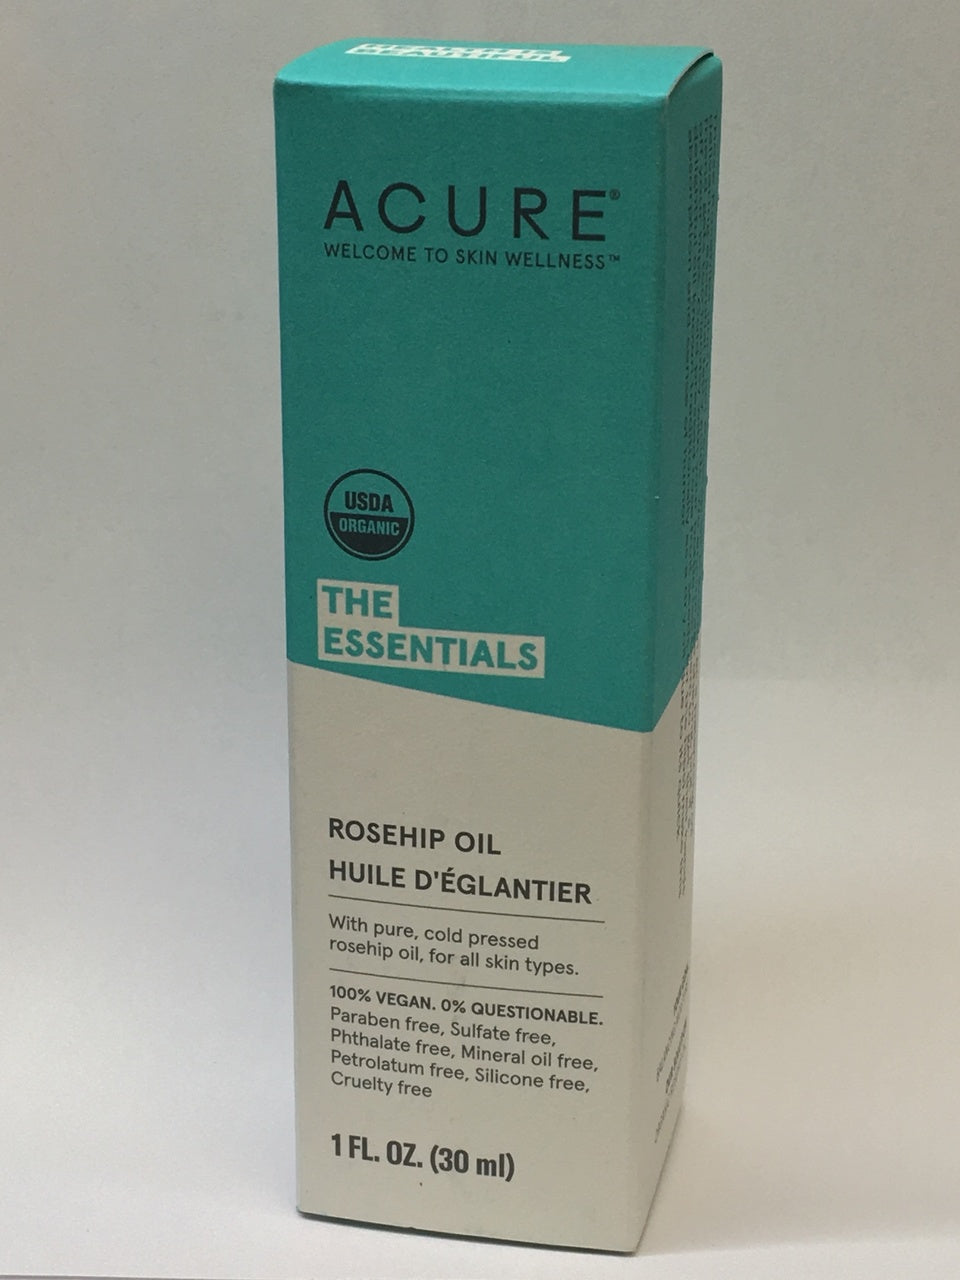 Acure The Essentials Rosehip Oil (30ml) - Lifestyle Markets